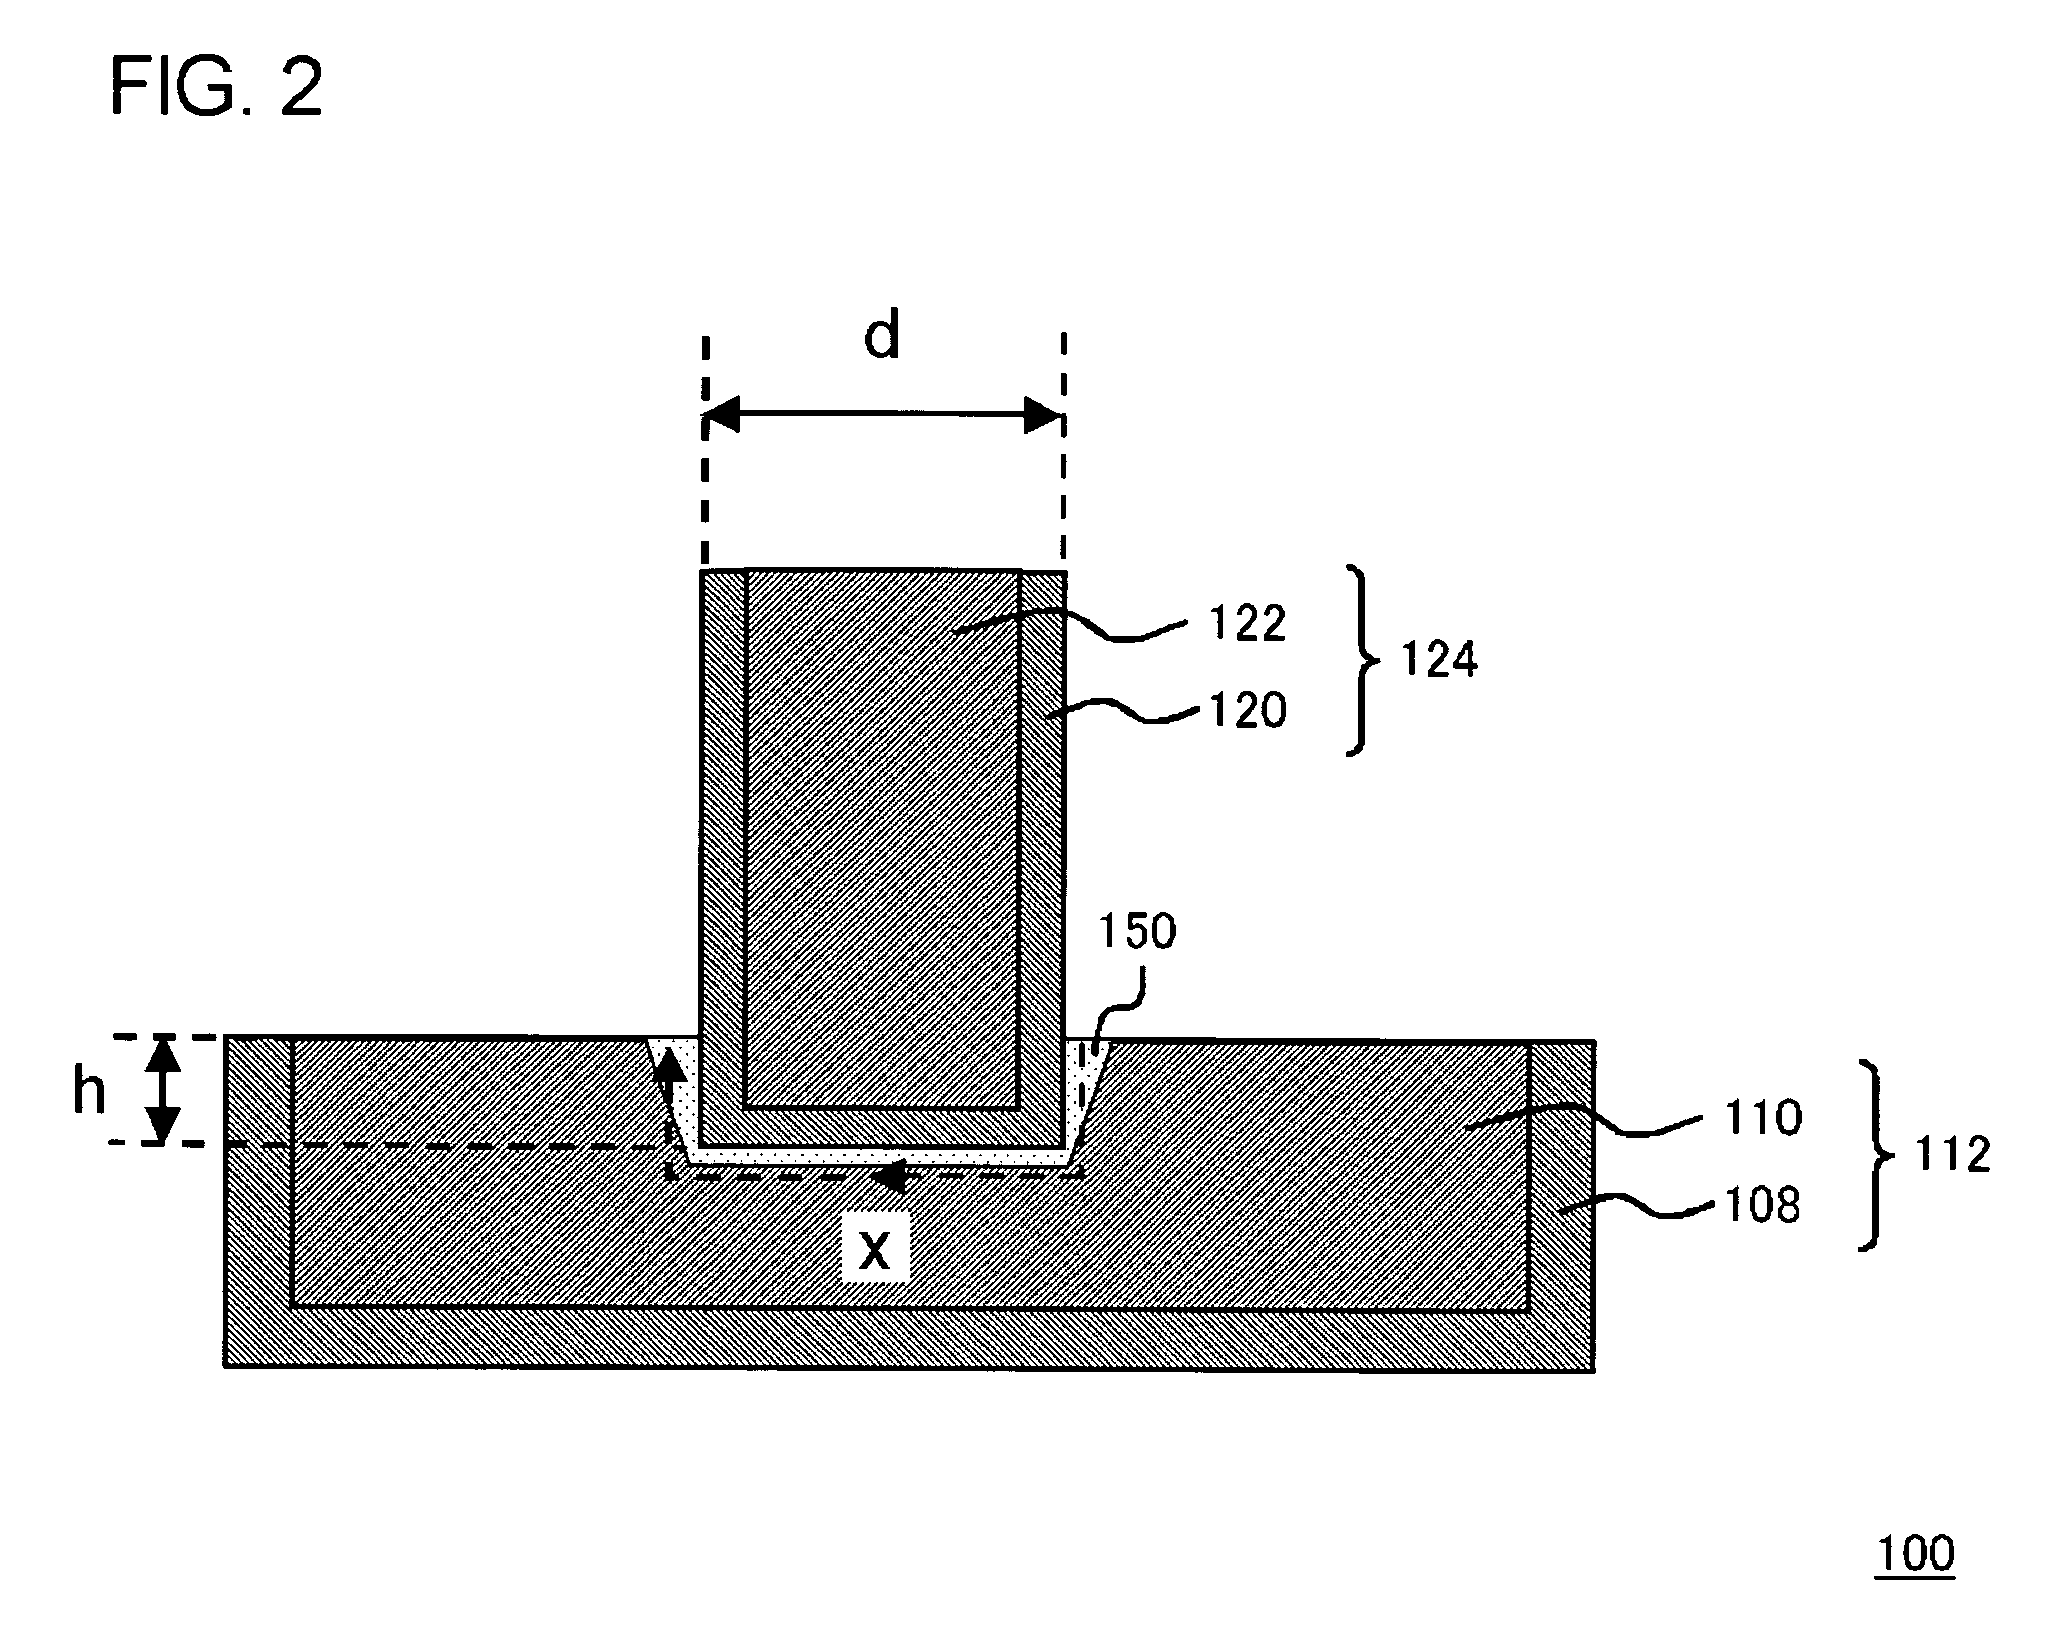 Methods for designing, evaluating and manufacturing semiconductor devices